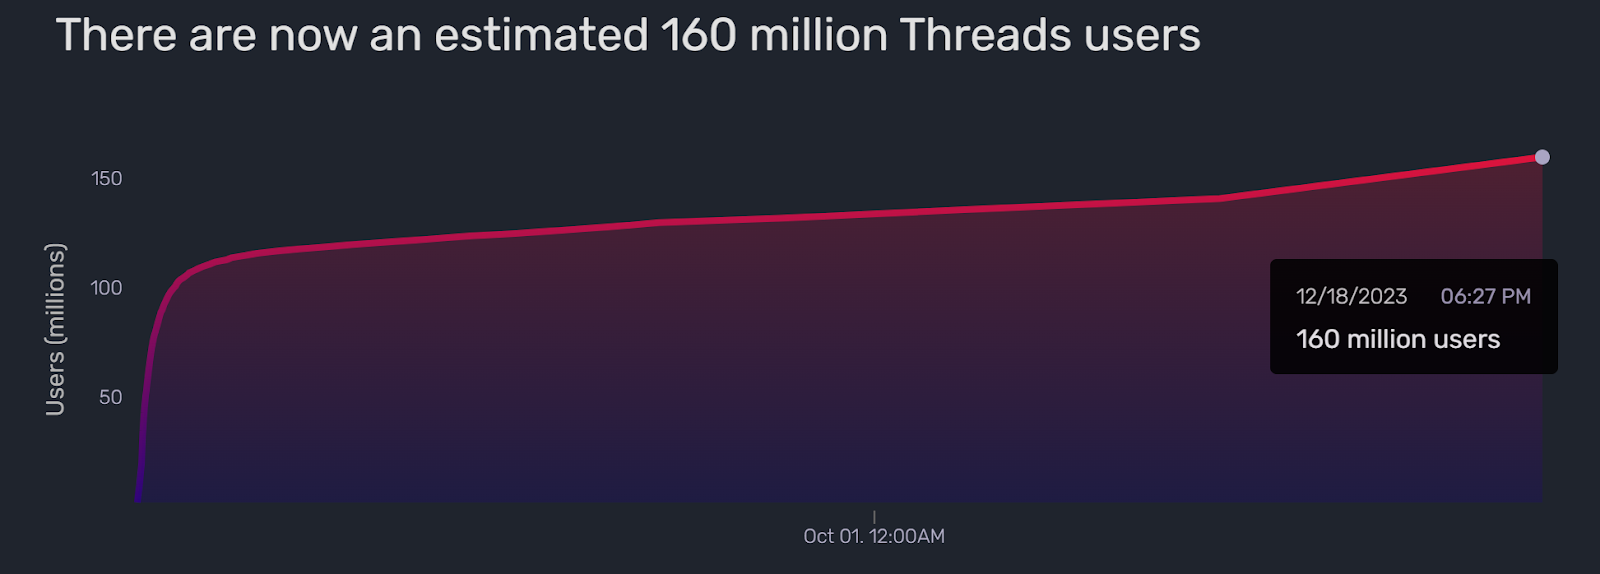 Quiver Quantitative Threads Tracker for estimated users on Threads